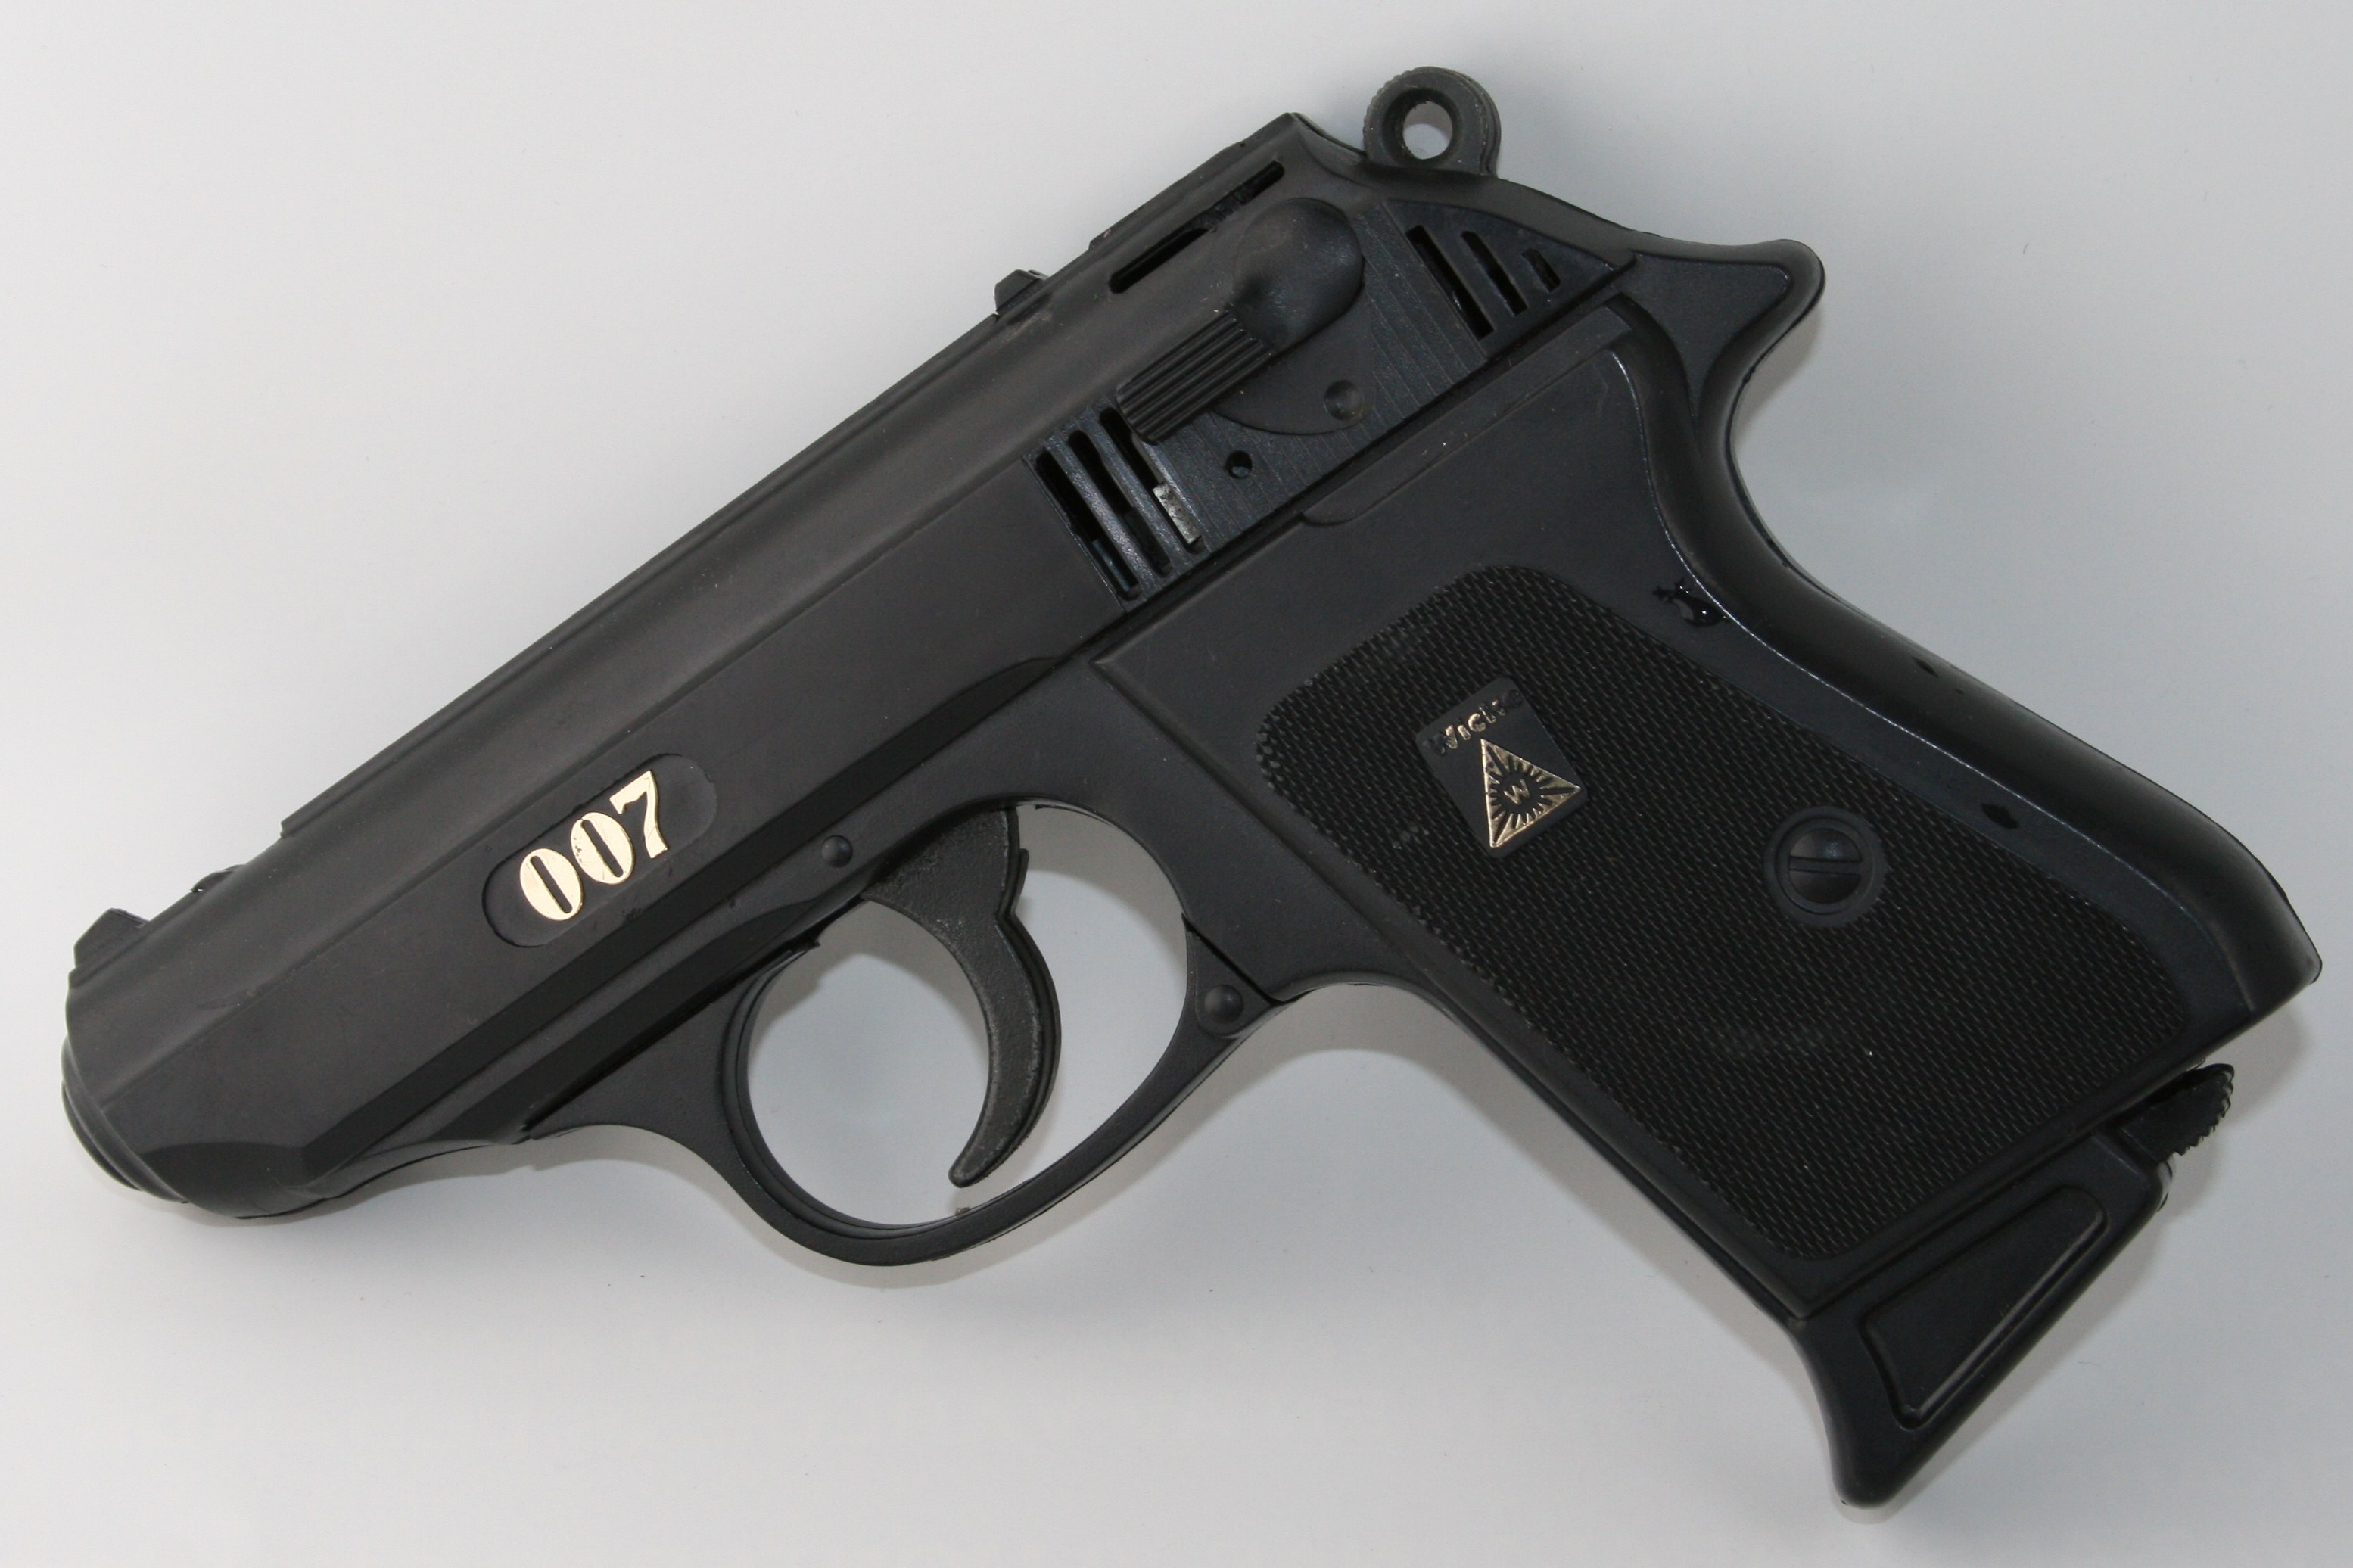 p99 walther ppk 9mm